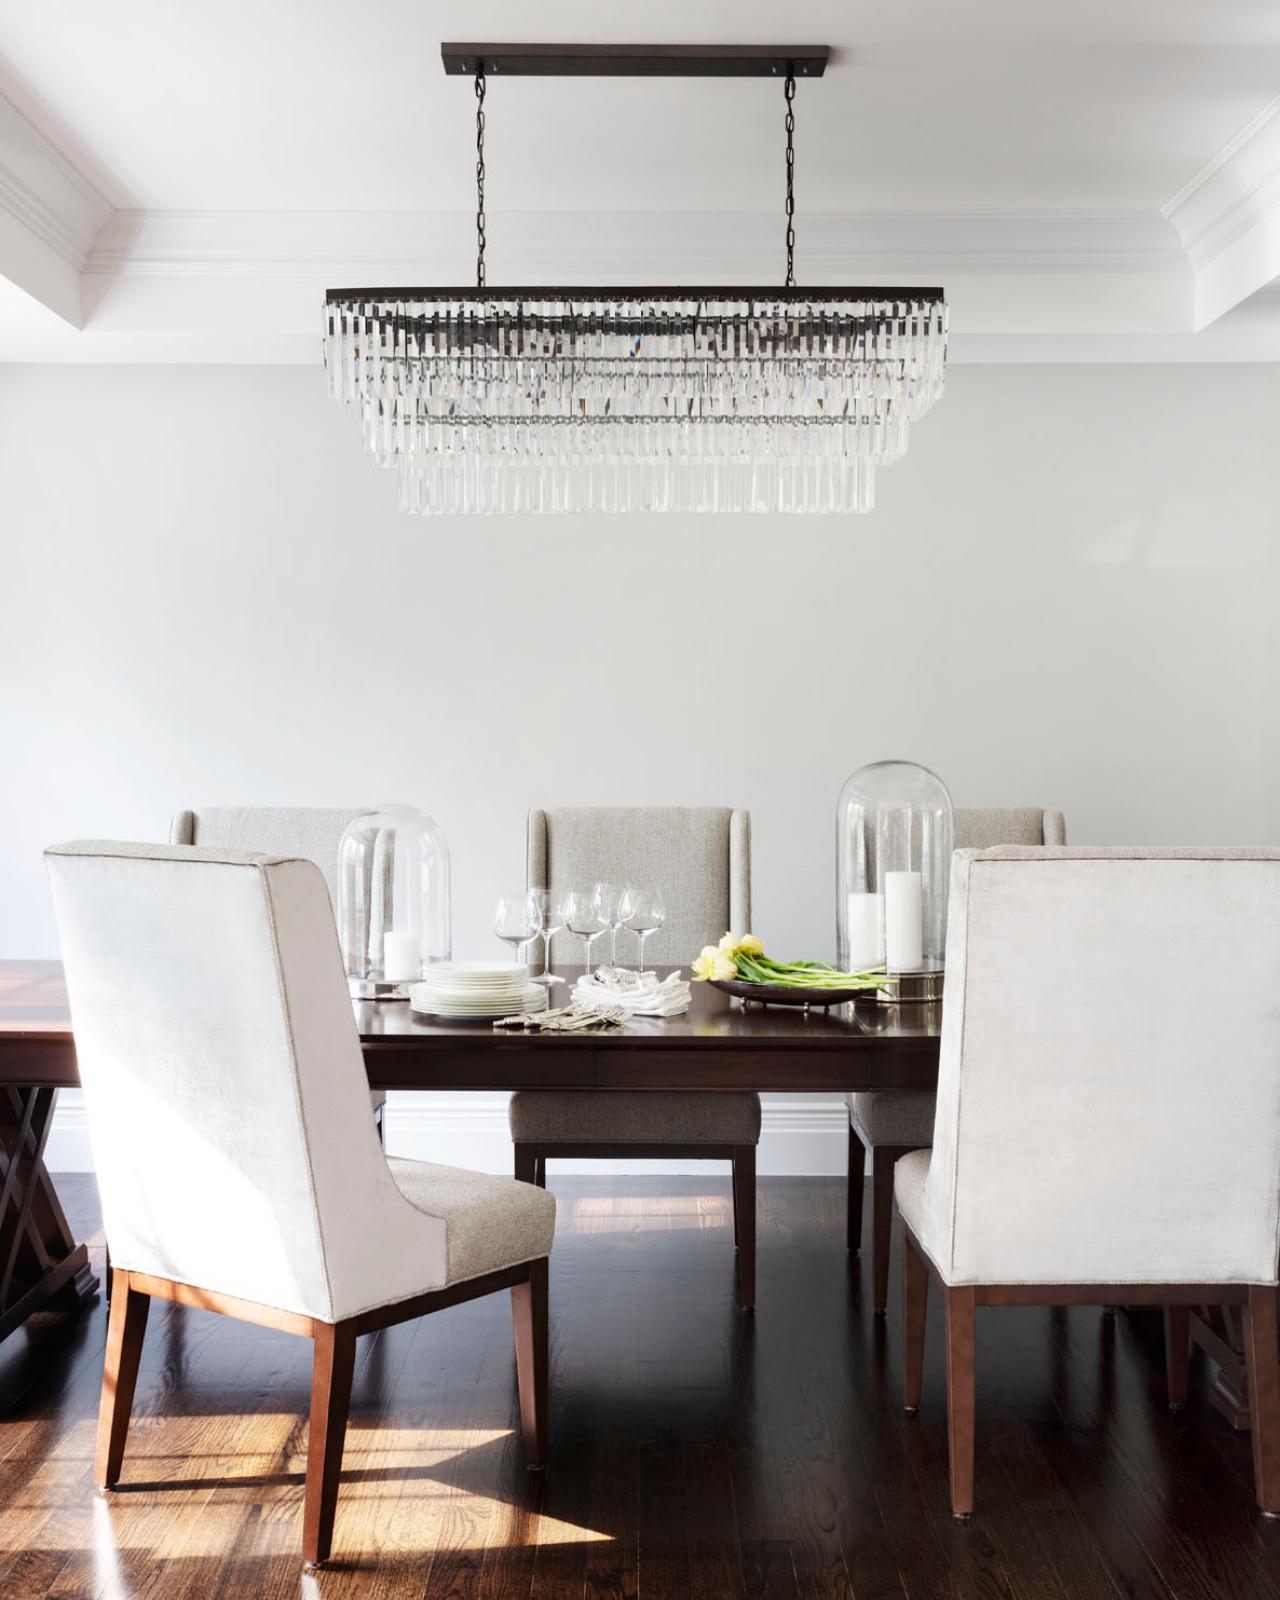 How To Choose Dining Room Lighting, How Big Should Light Over Dining Table Be